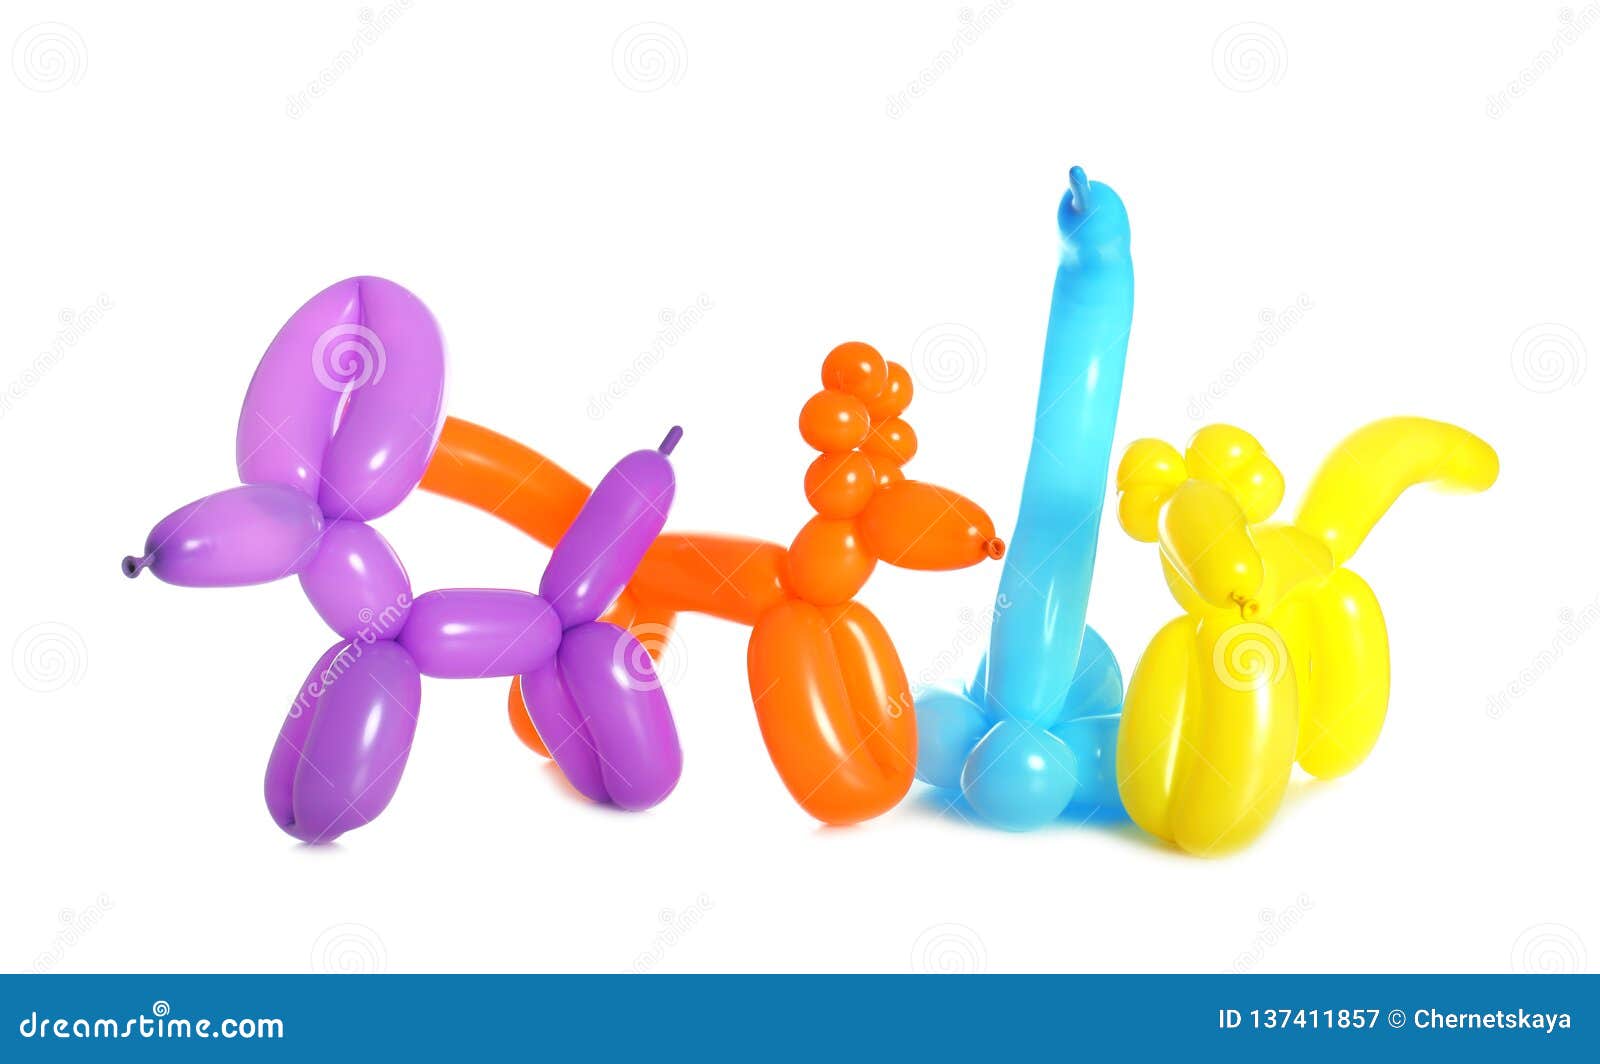 animal figures made of modelling balloons